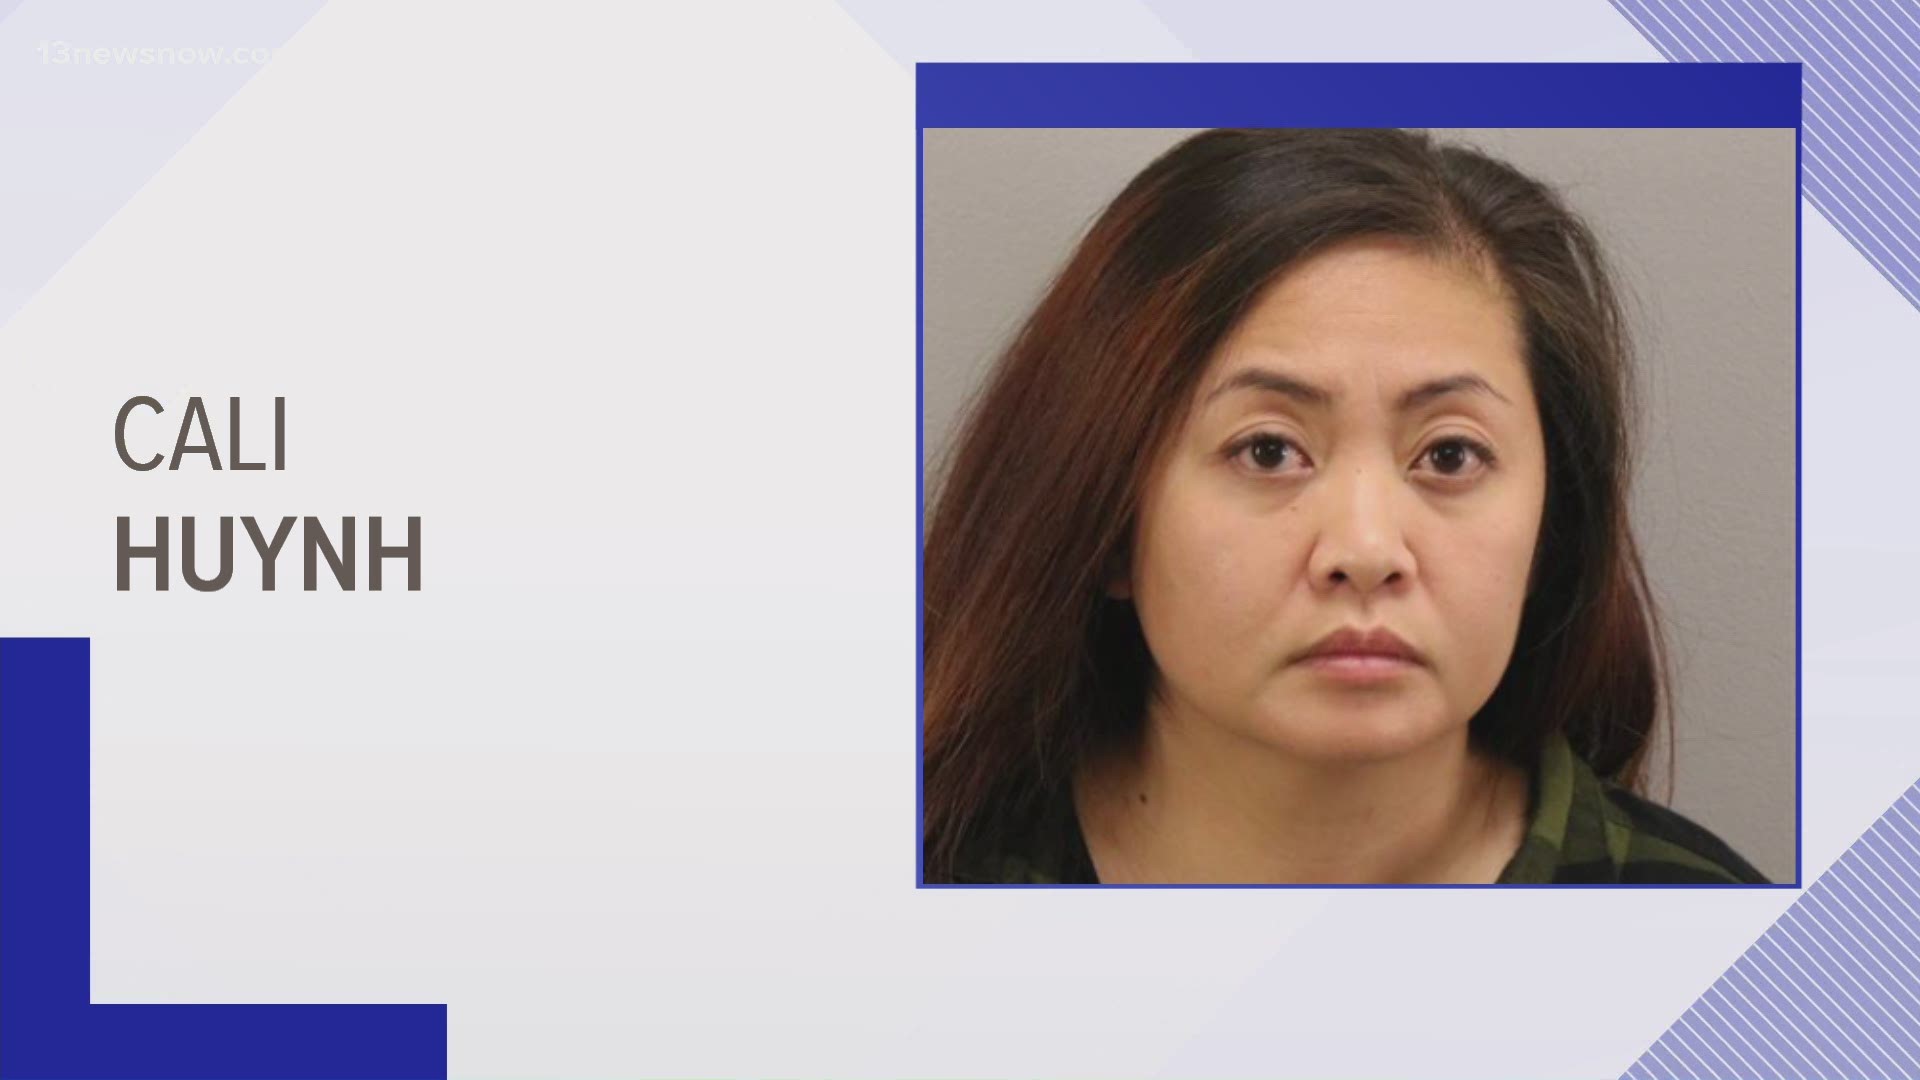 Cali Huynh is charged with involuntary manslaughter. She was driving her Jeep when it hit a Yamaha motorcycle. The rider of the motorcycle died.